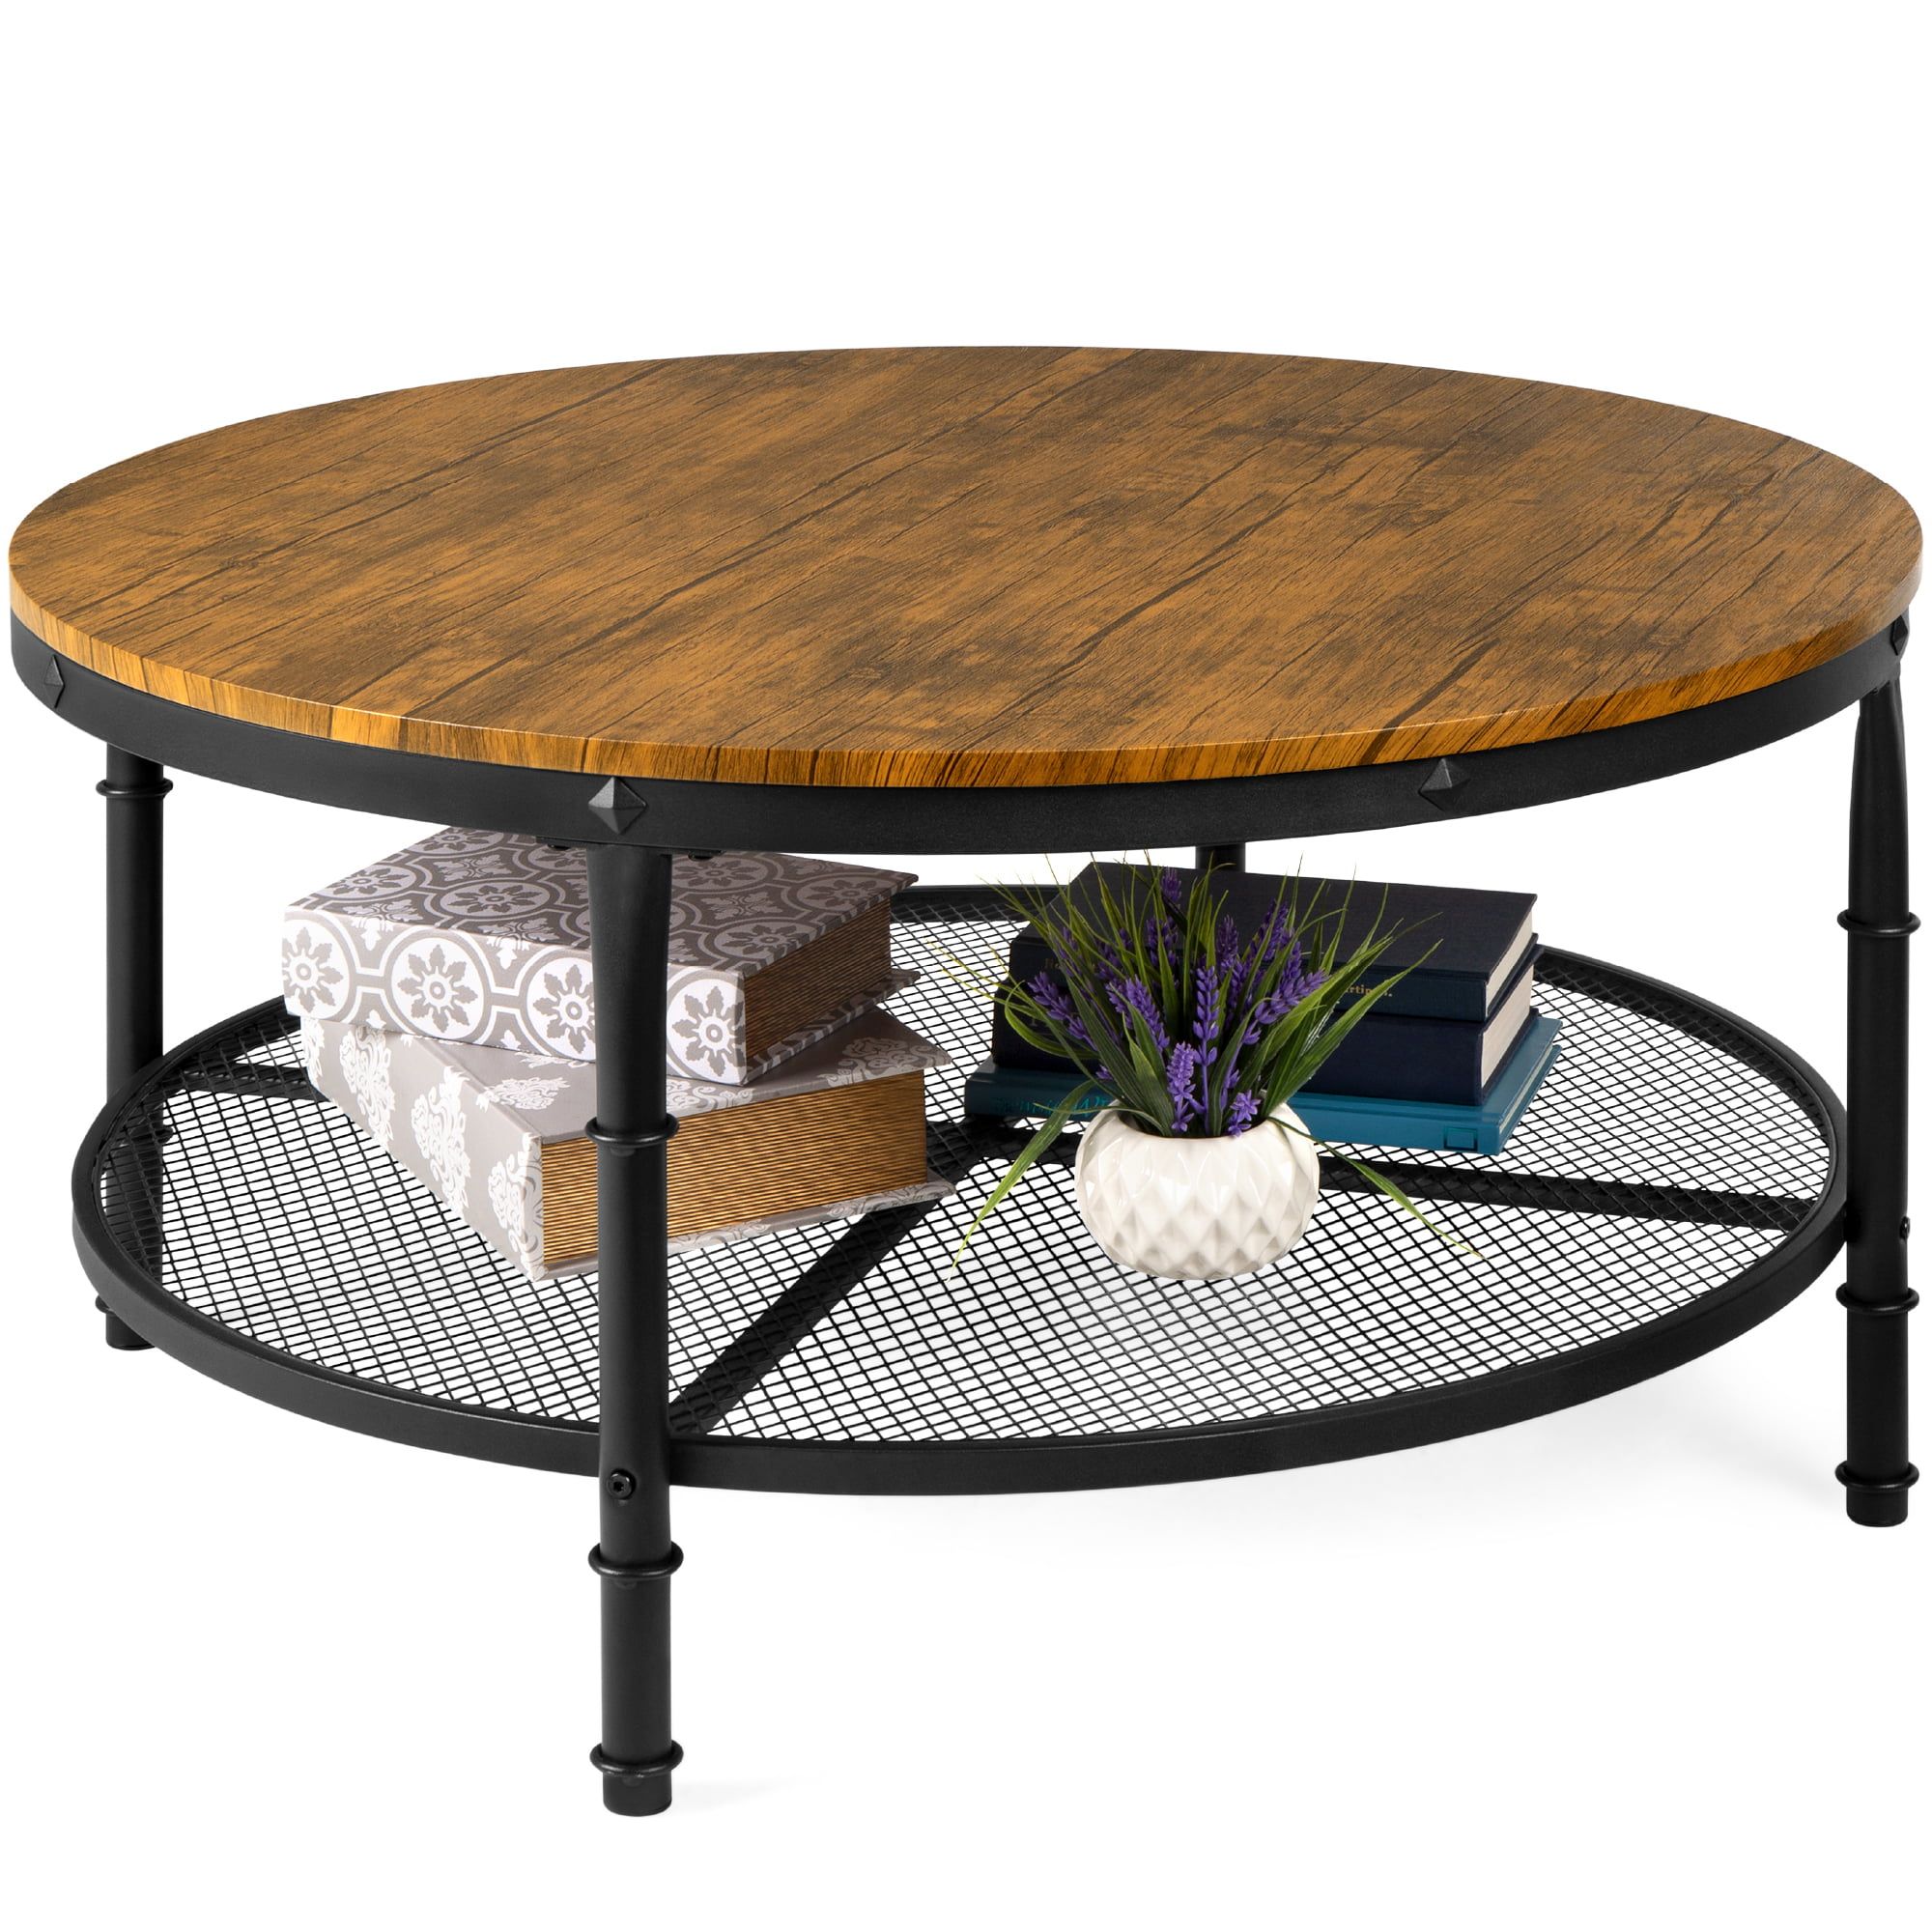 Best Choice Products 2 Tier Round Coffee Table, Rustic Steel Accent Throughout Round Steel Patio Coffee Tables (Gallery 17 of 20)